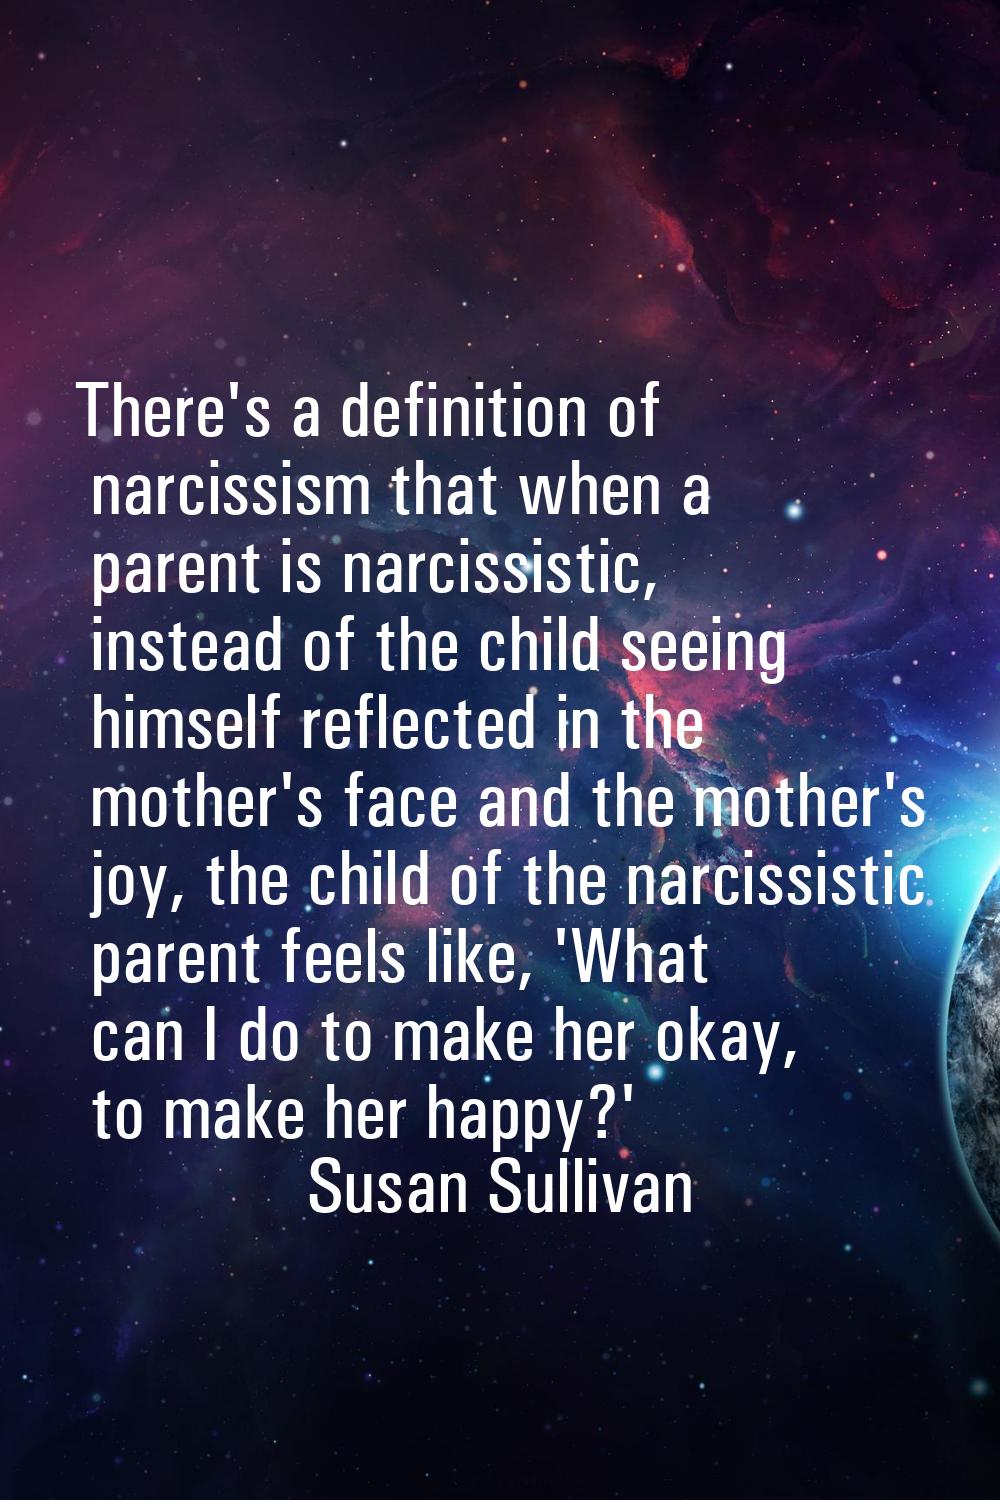 There's a definition of narcissism that when a parent is narcissistic, instead of the child seeing 